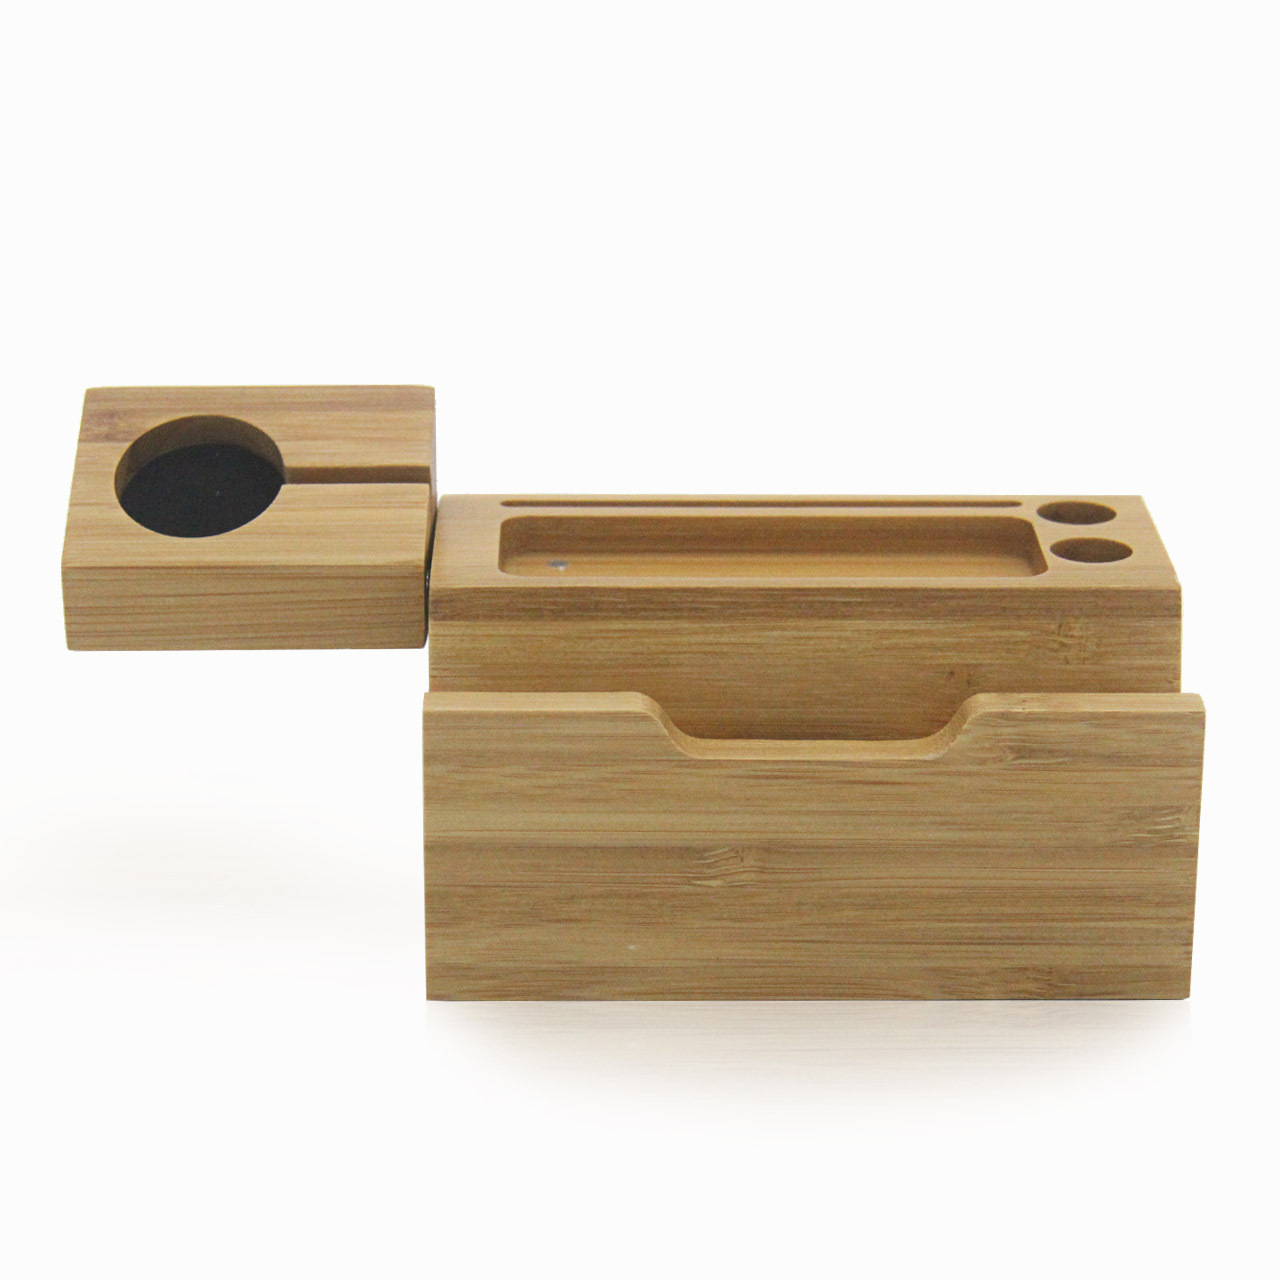 Natural-Bamboo-USB-Charging-Dock-Stand-Holder-Bracket-for-Mobile-Phone-Smart-Watch-1282457-4